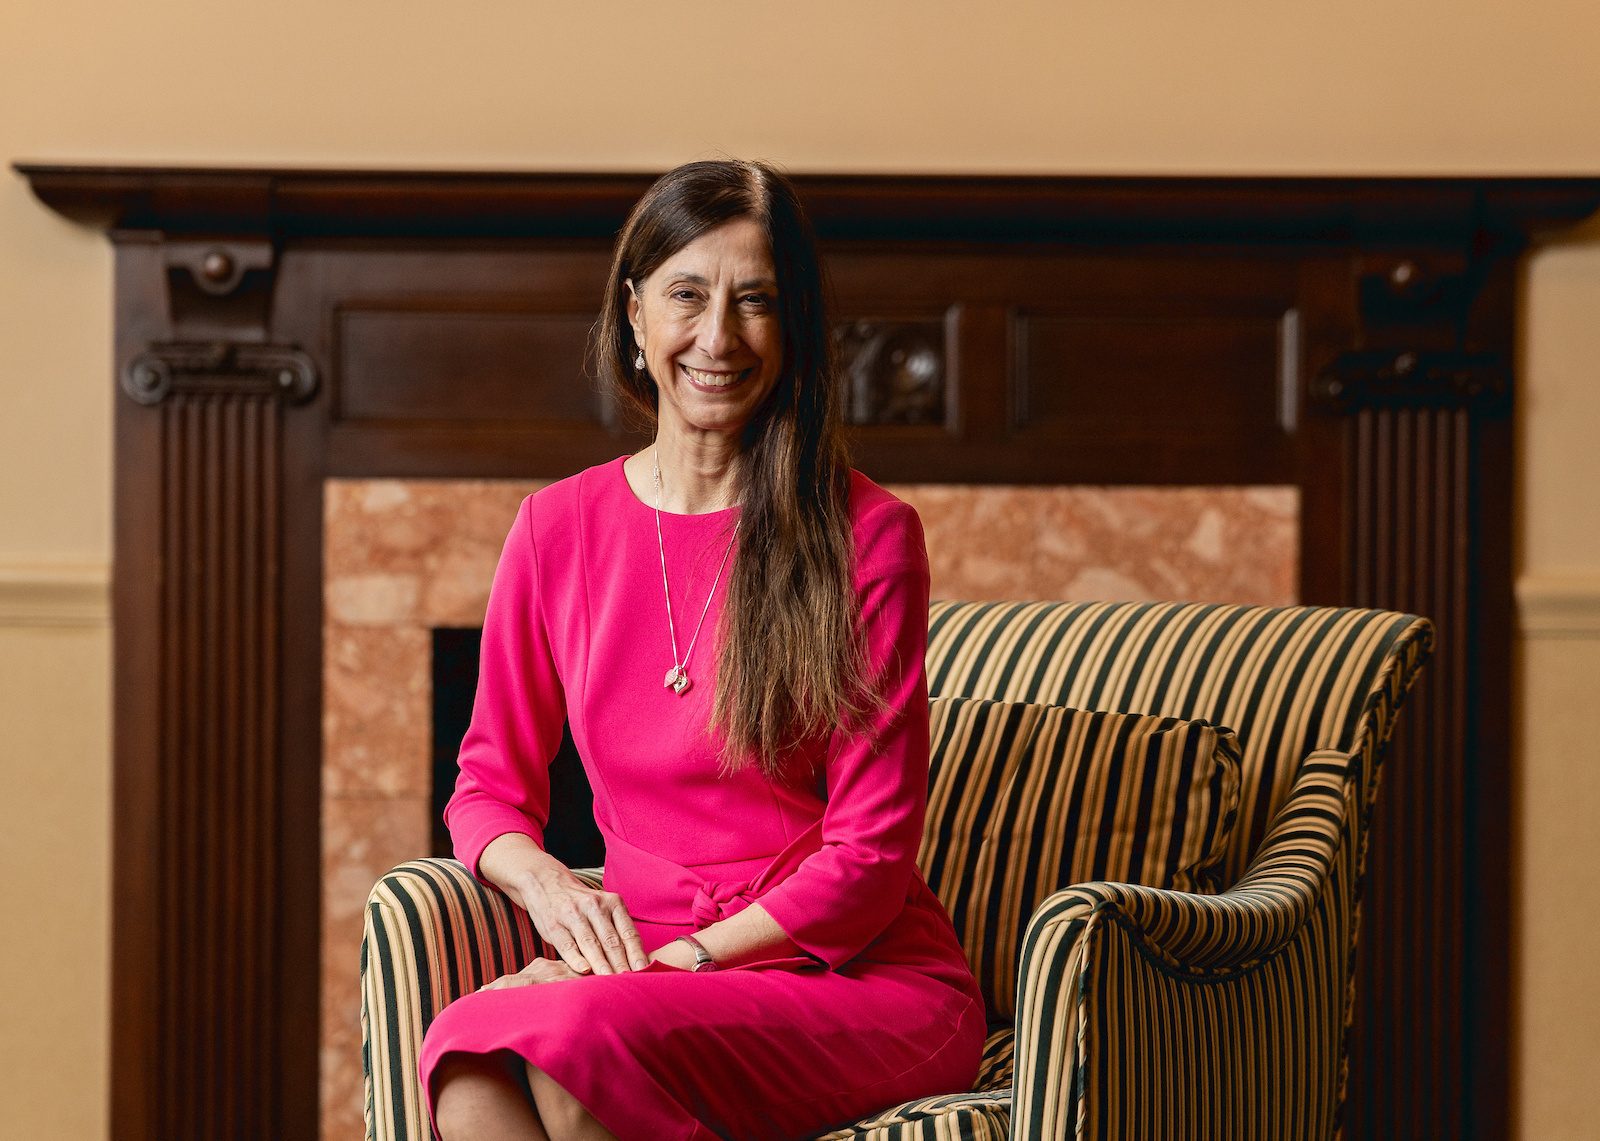 A woman in a hot pink dress smiles as she sits in a striped armchair